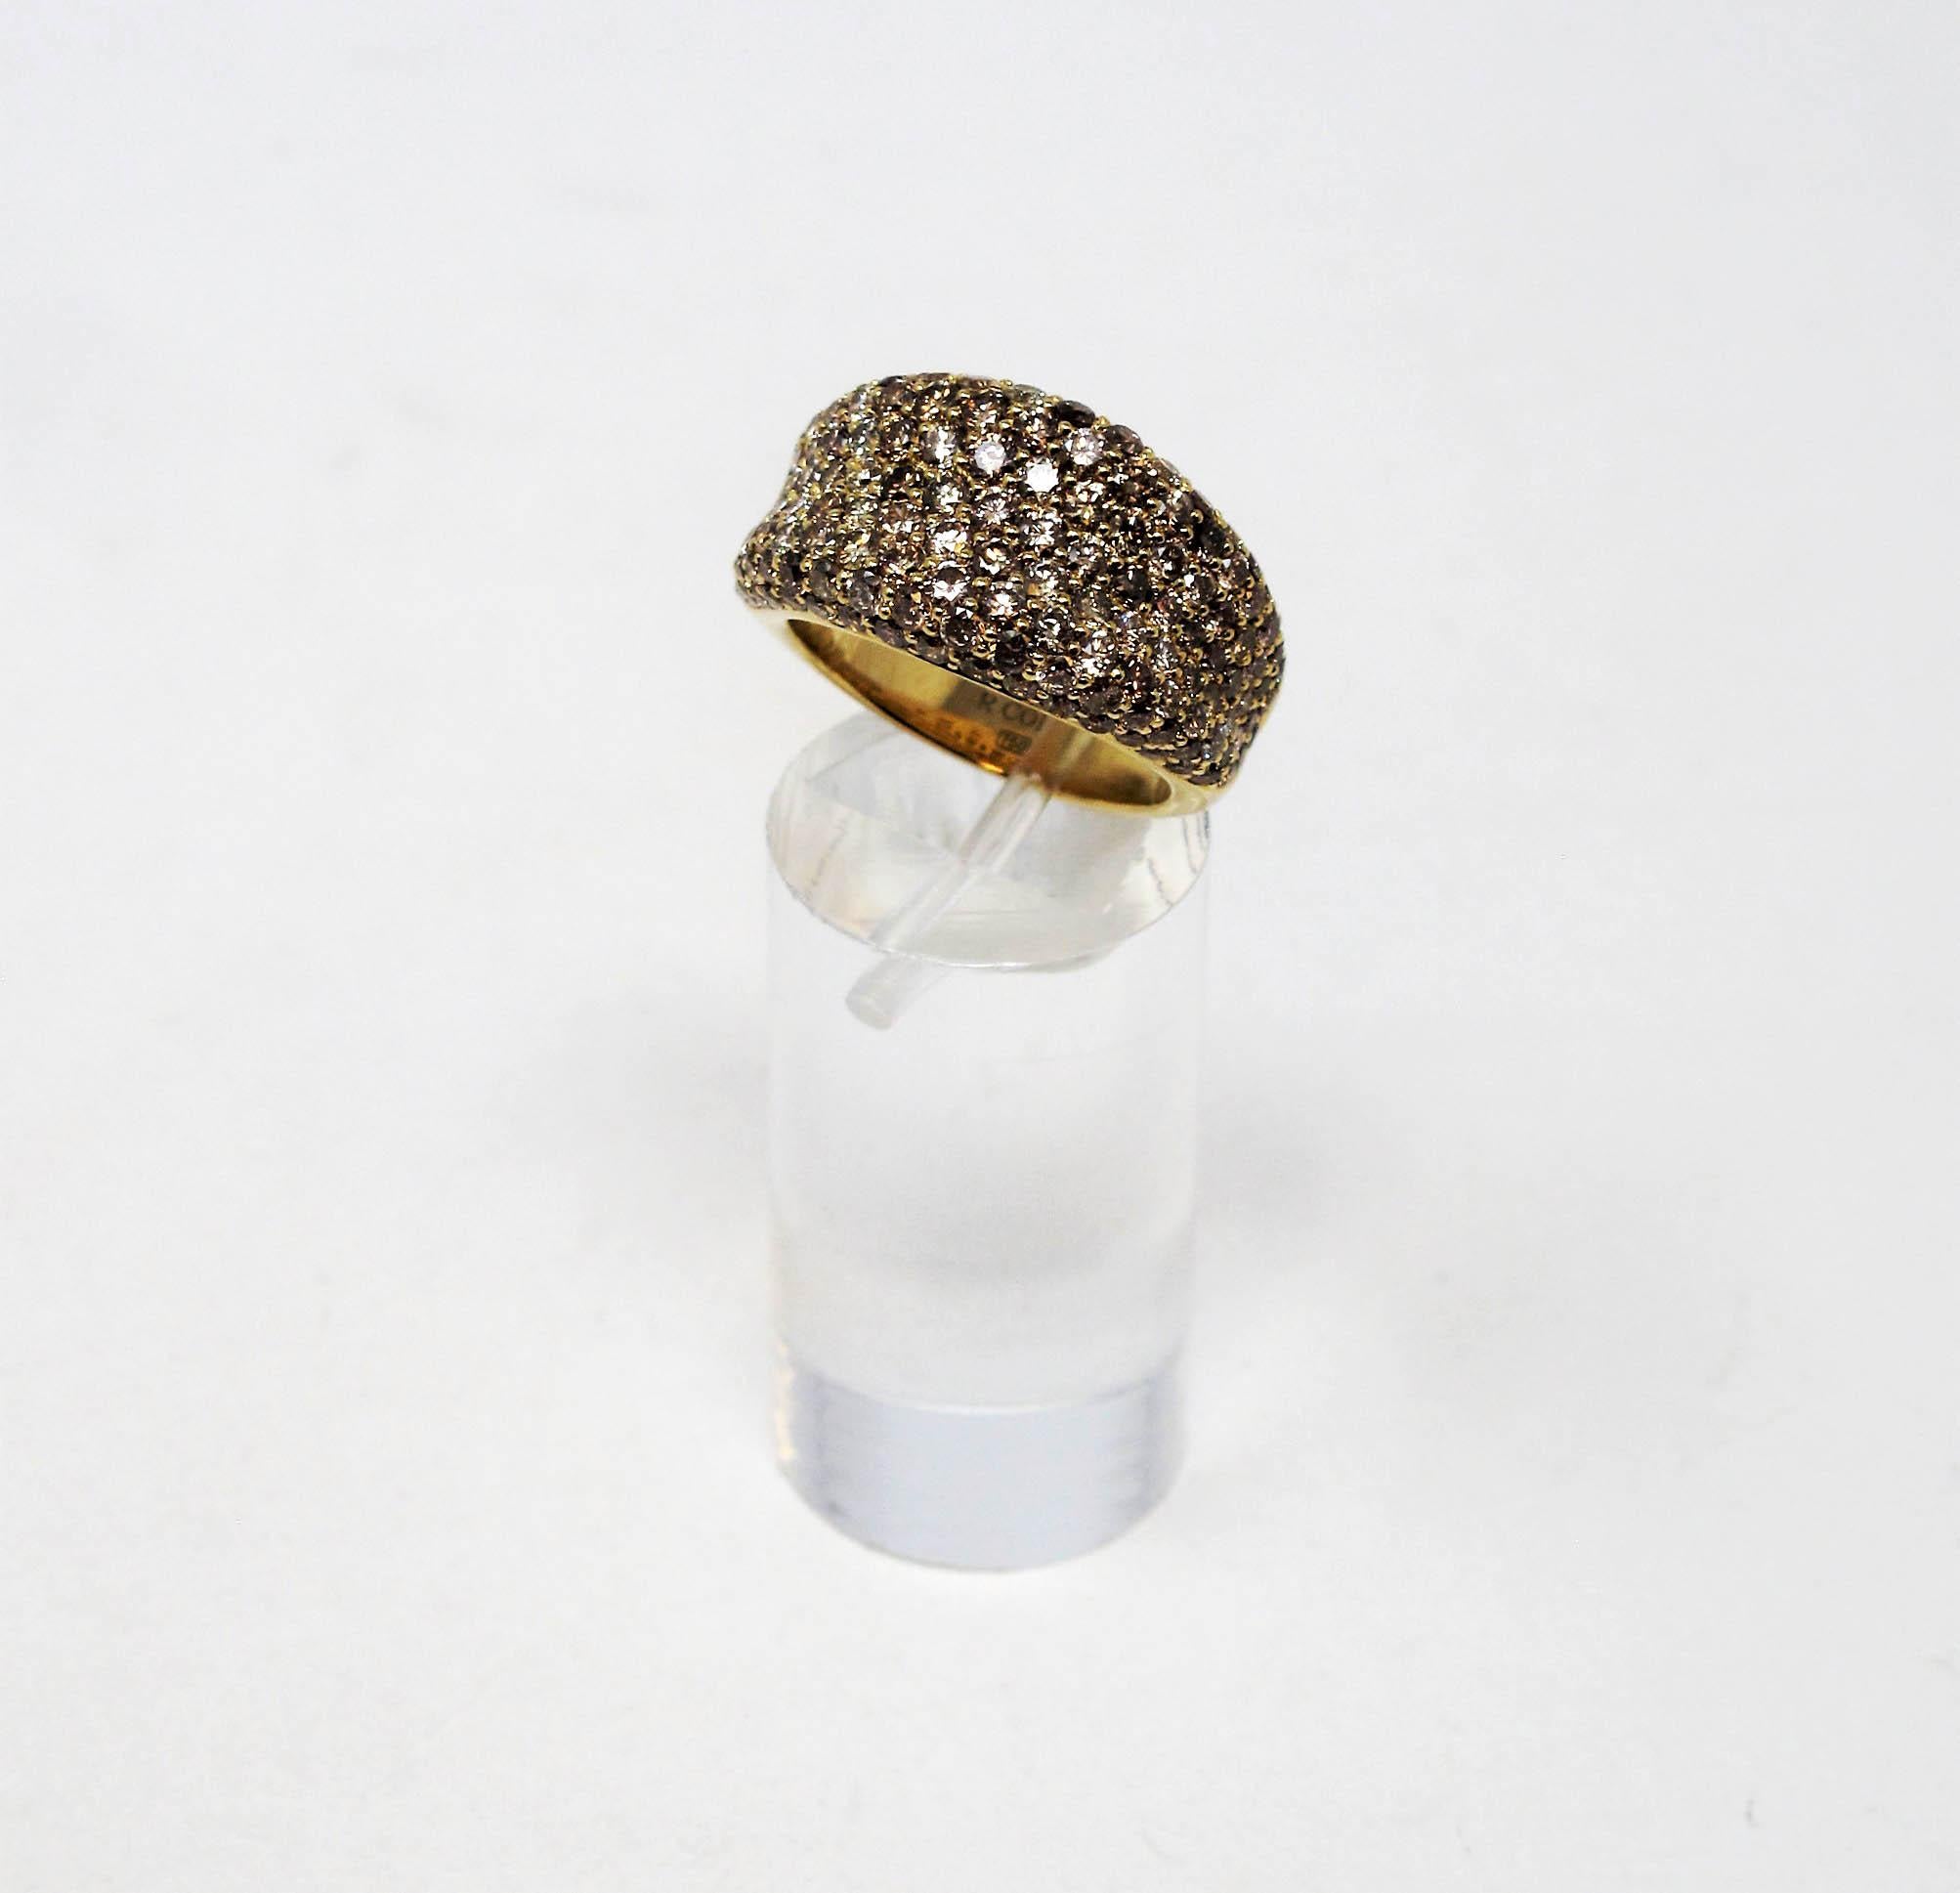 Ring size: 6.25

Stunning and unique champagne pave diamond ring by Roberto Coin. This sophisticated ring is shockingly sparkly on the finger. With its unique brownish hue, it flatters all skin types and makes a real statement. This glamorous piece